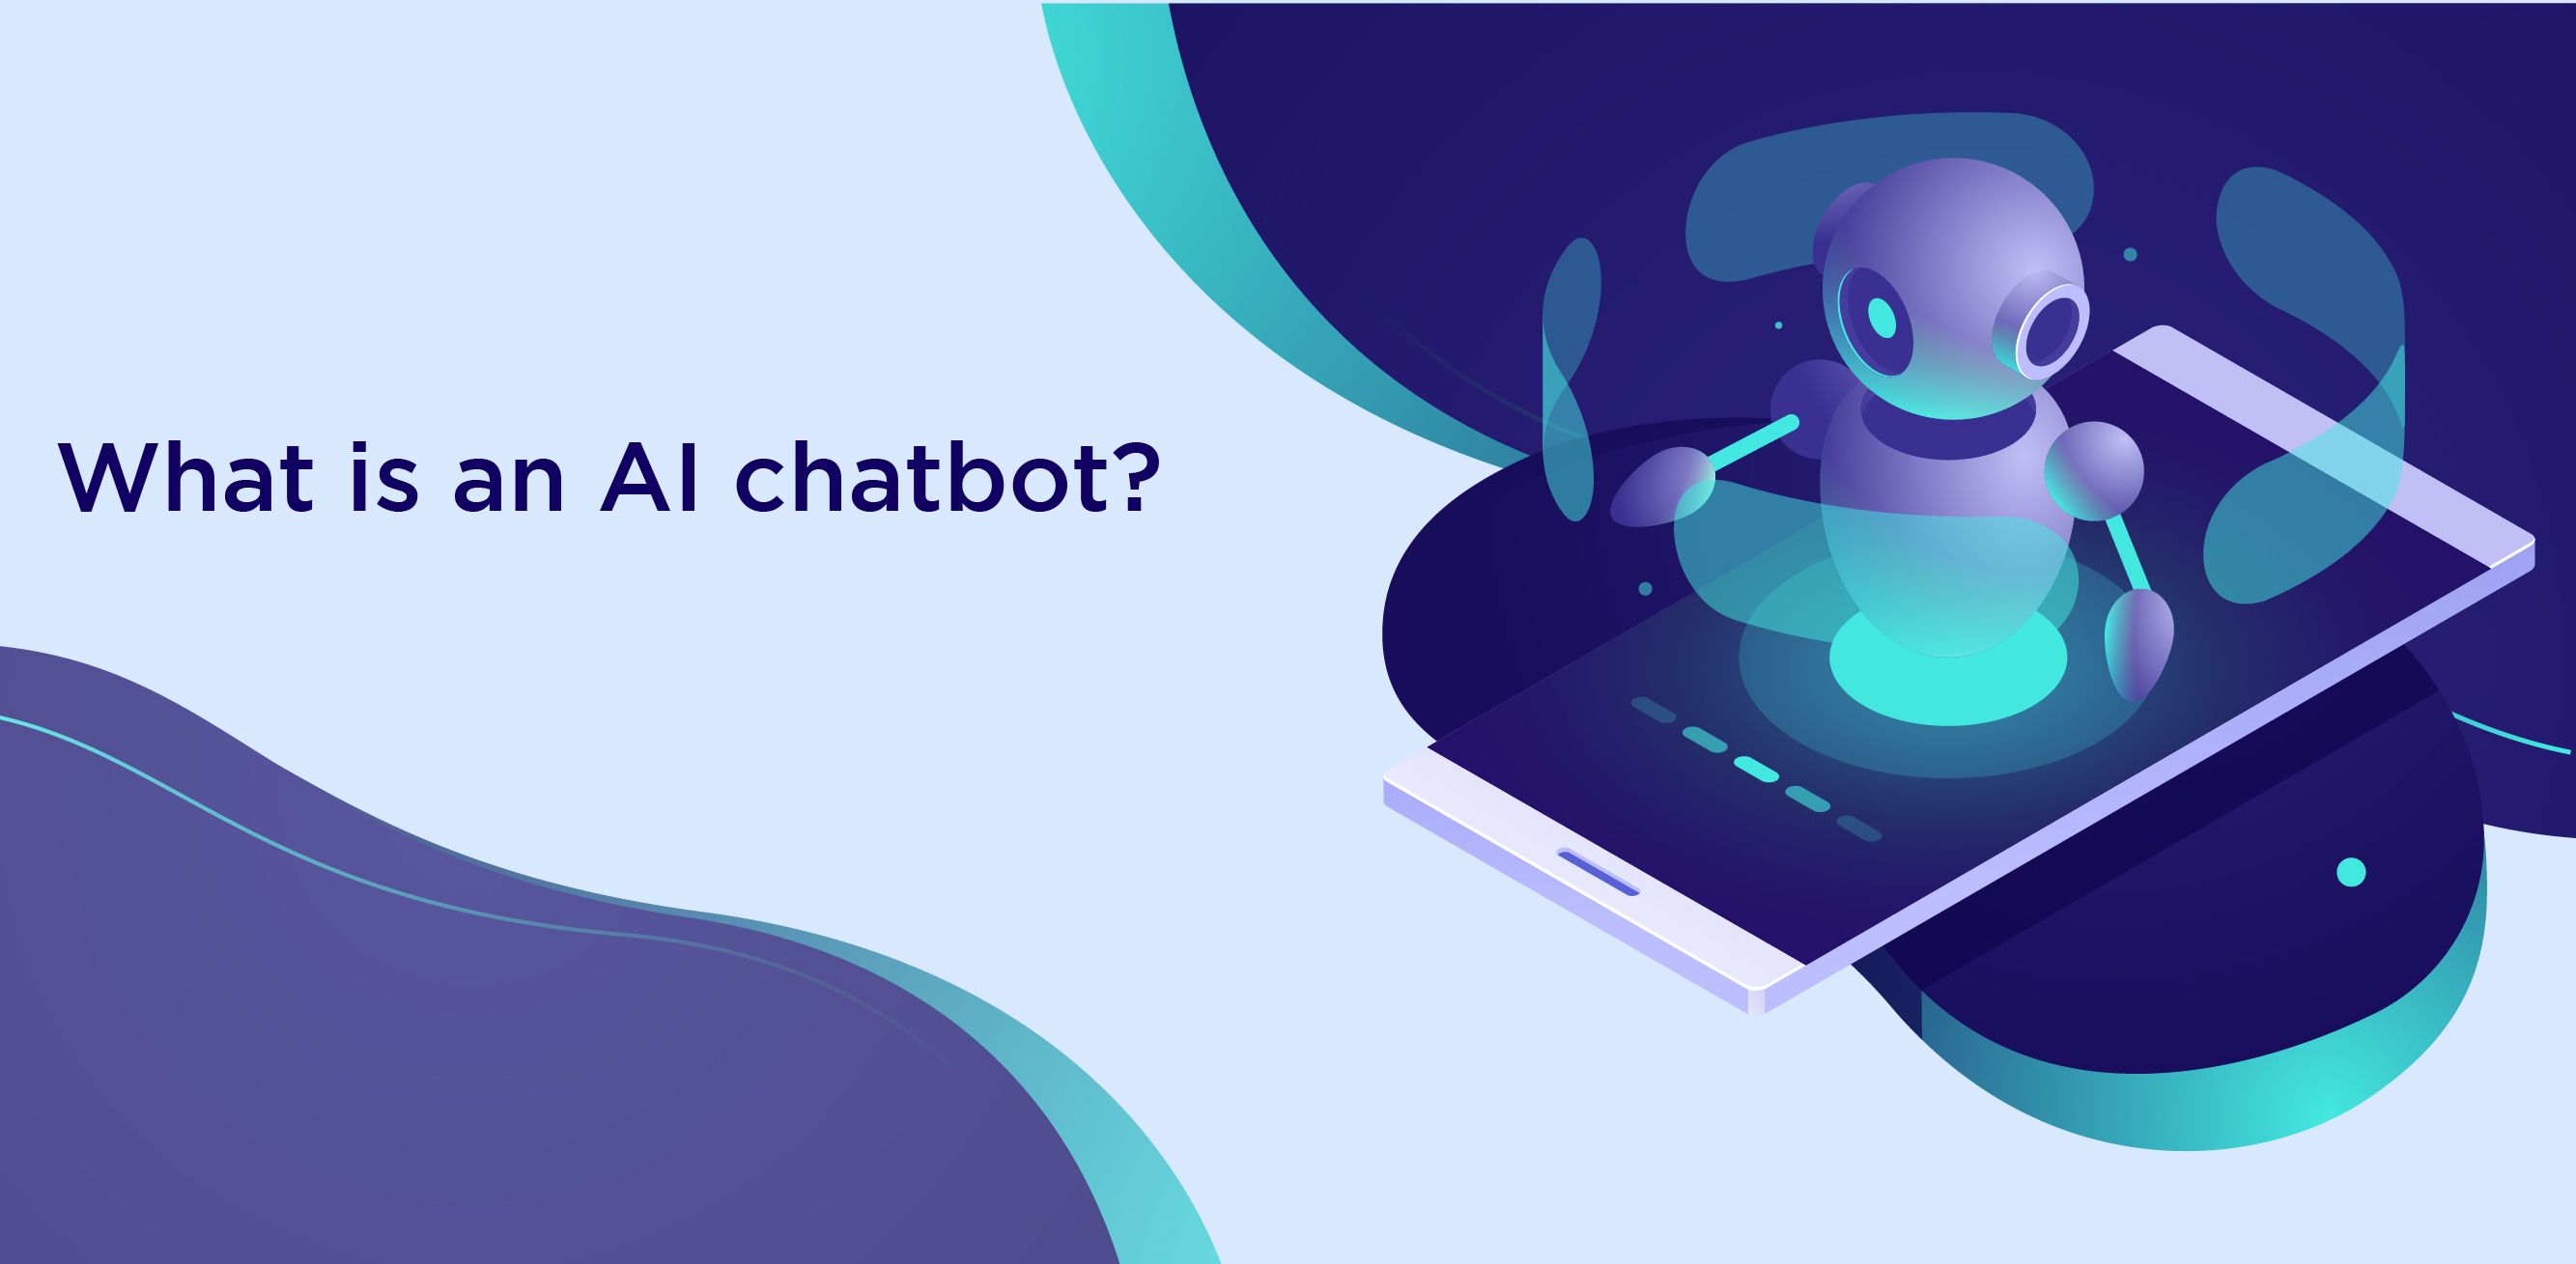 What is an AI chatbot